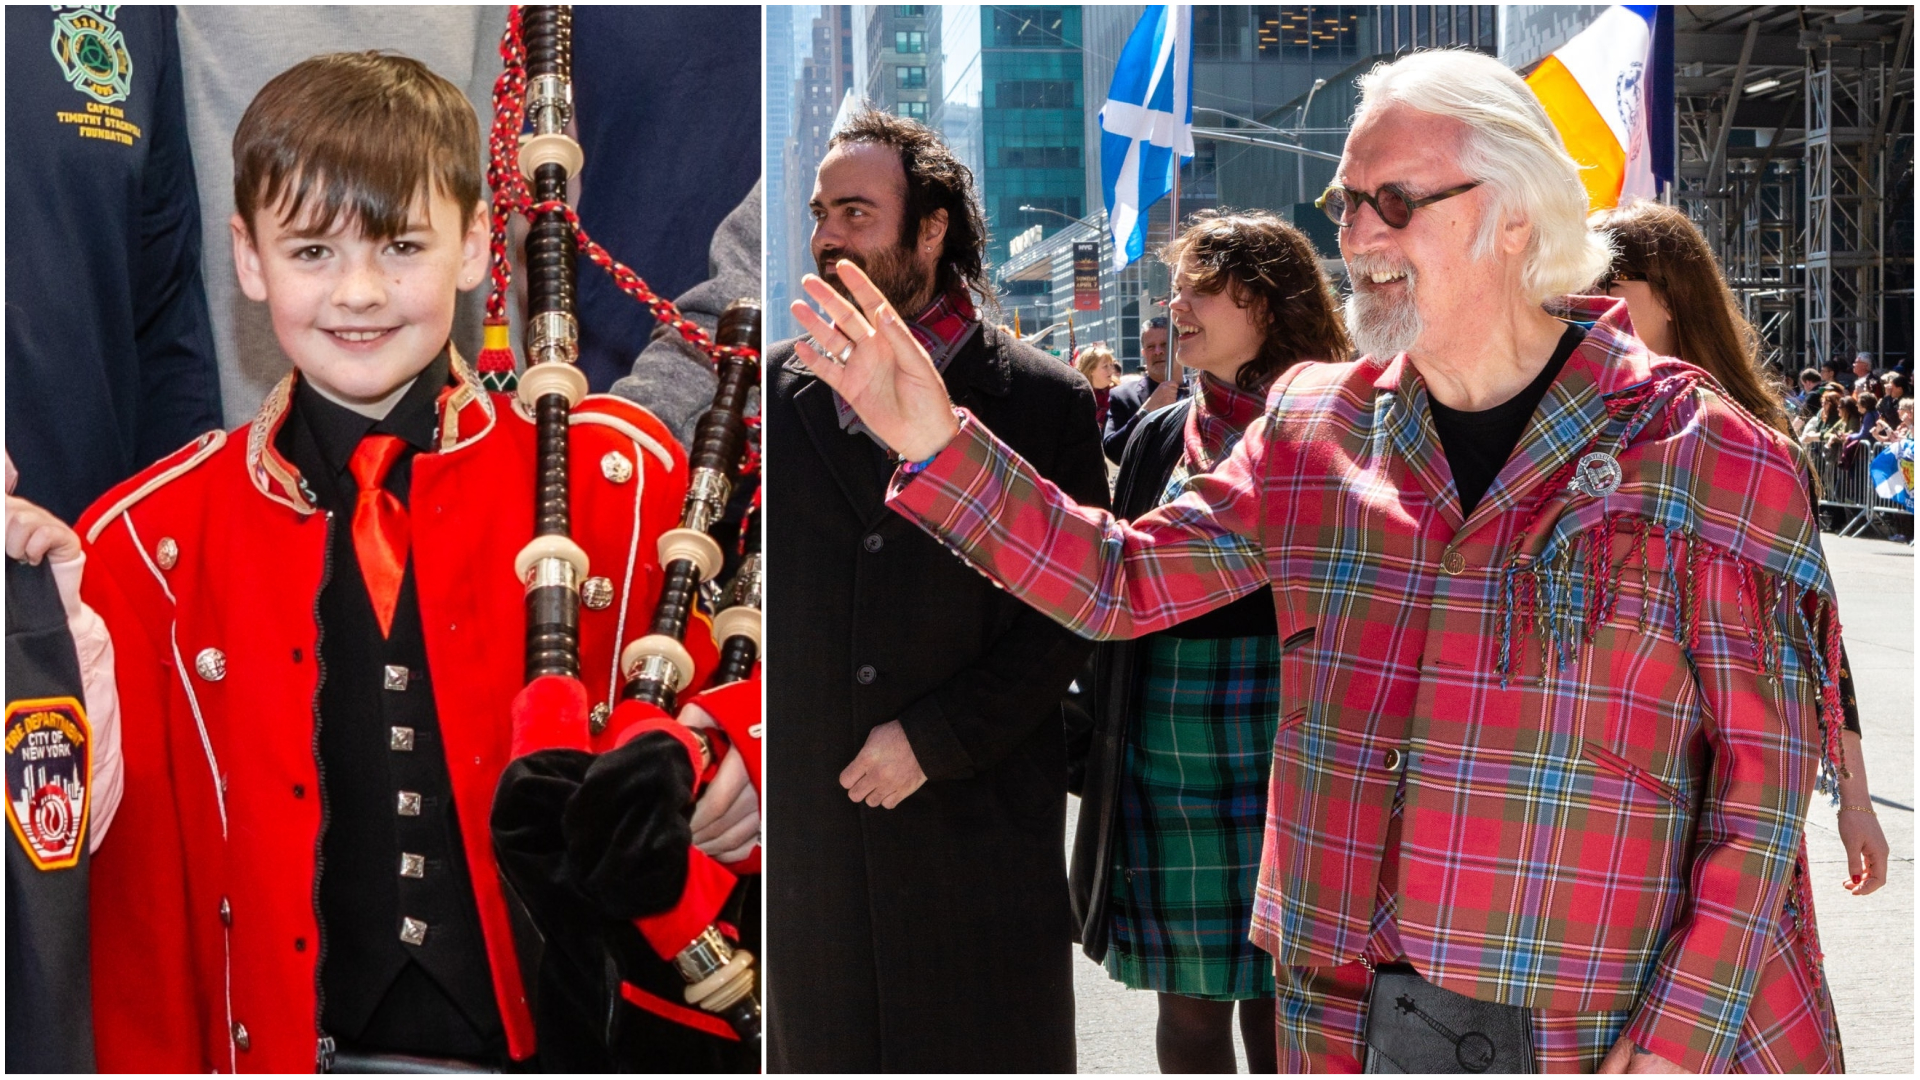 Josh Bruce and Billy Connolly were both involved in the Tartan Day celebrations.